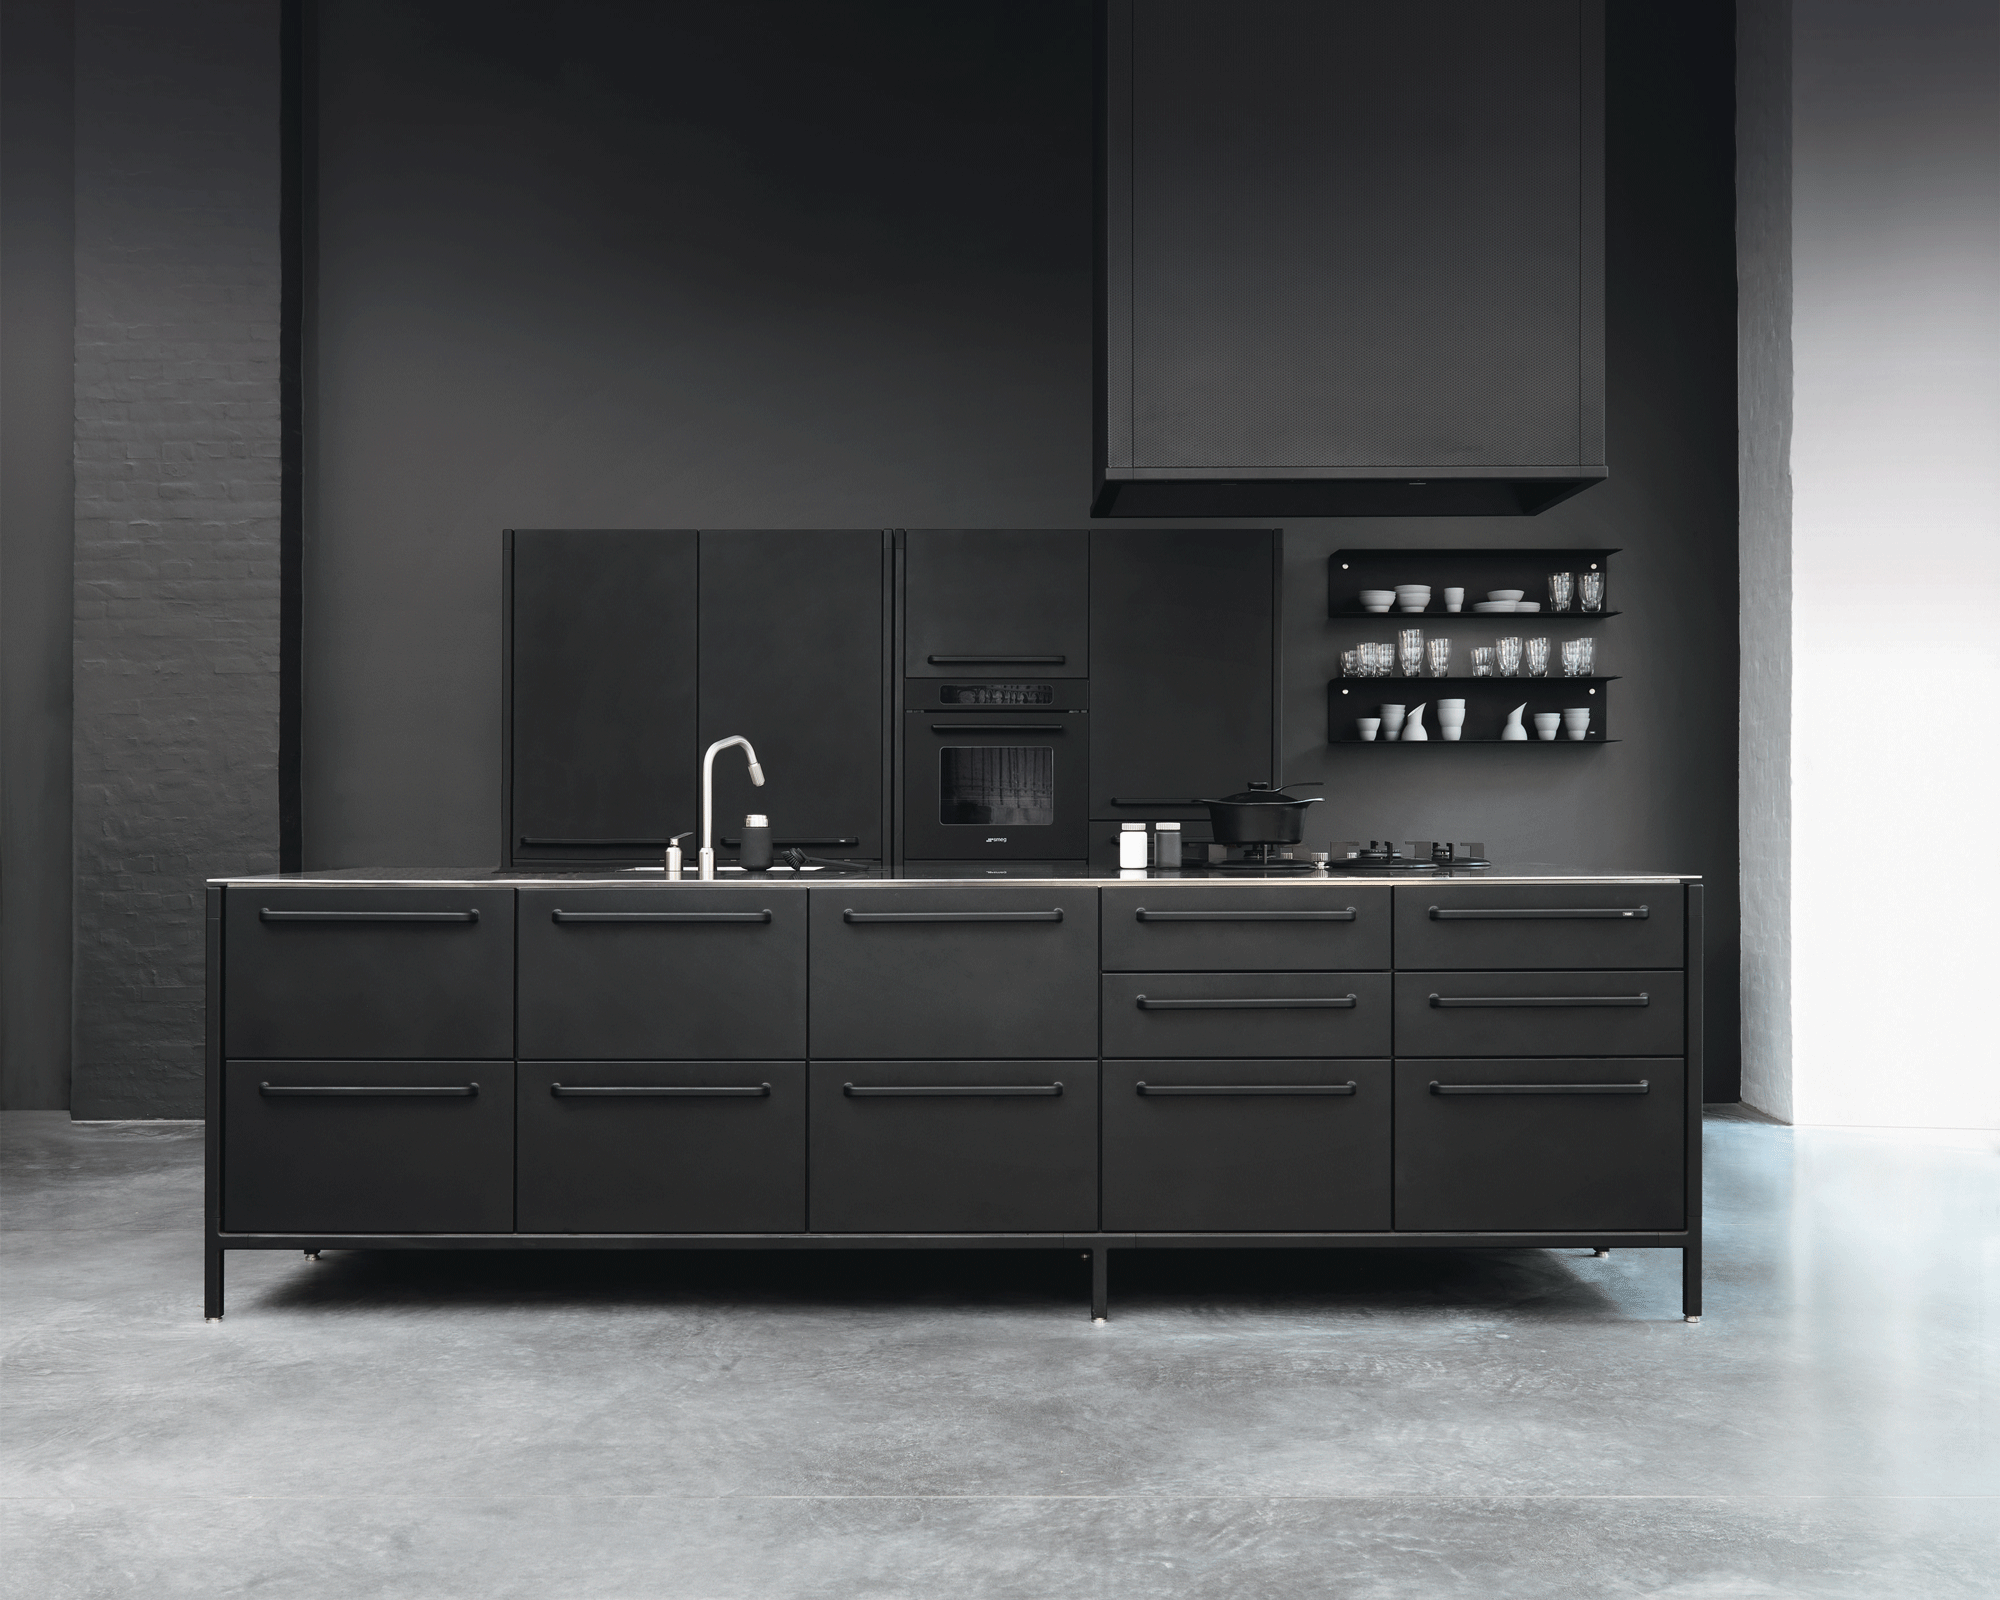 An example of freestanding kitchens showing a black freestanding kitchen